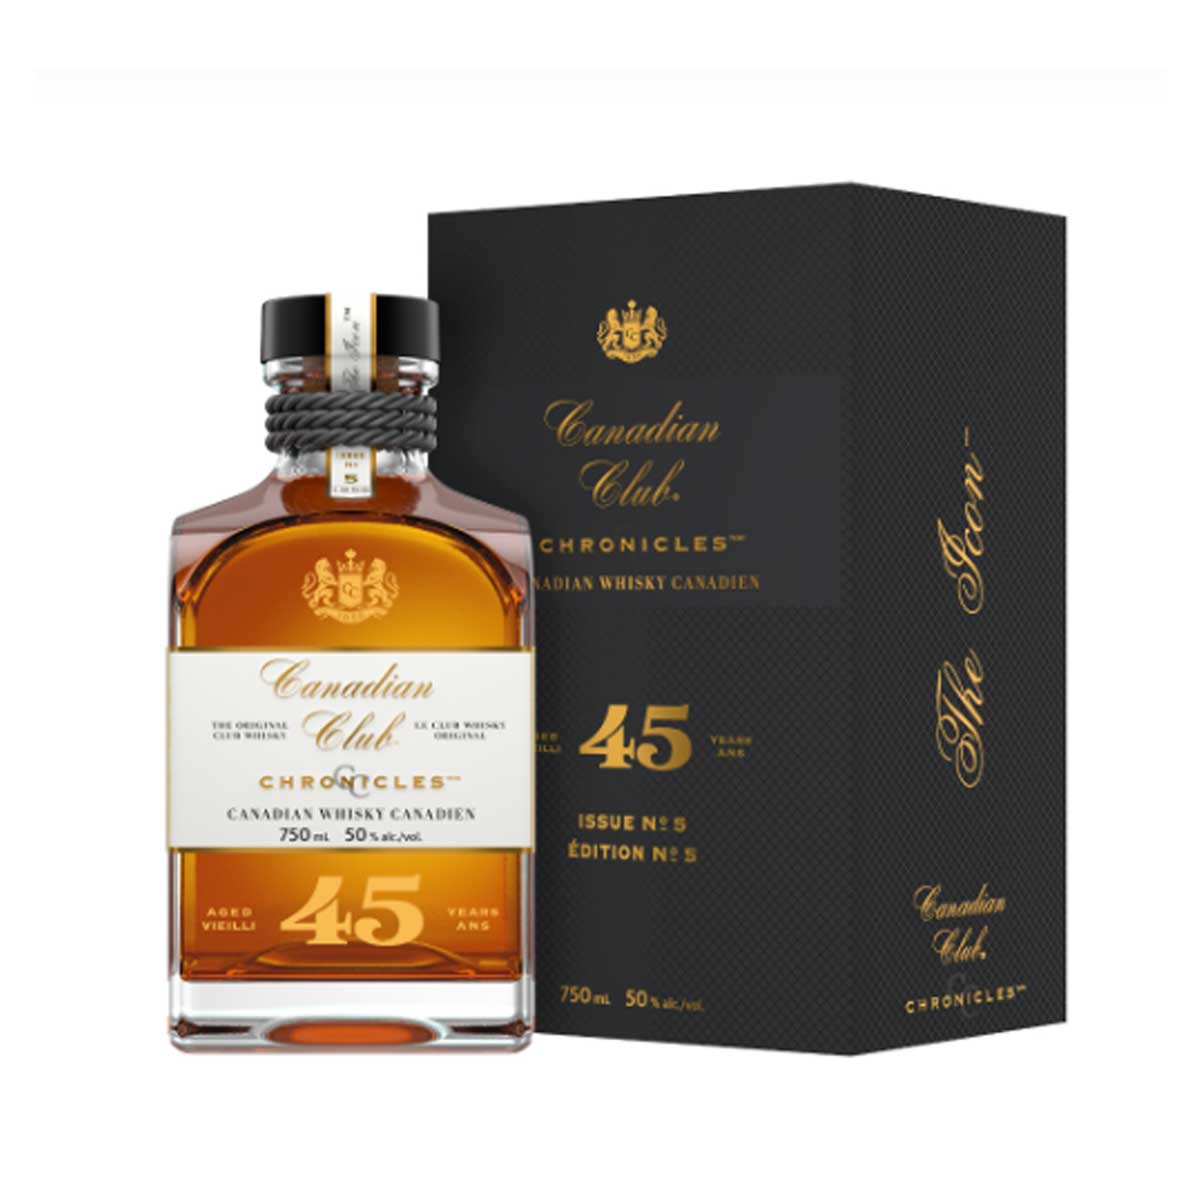 TAG Liquor Stores BC - Canadian Club Chronicles 45 Year Old Whisky 750ml